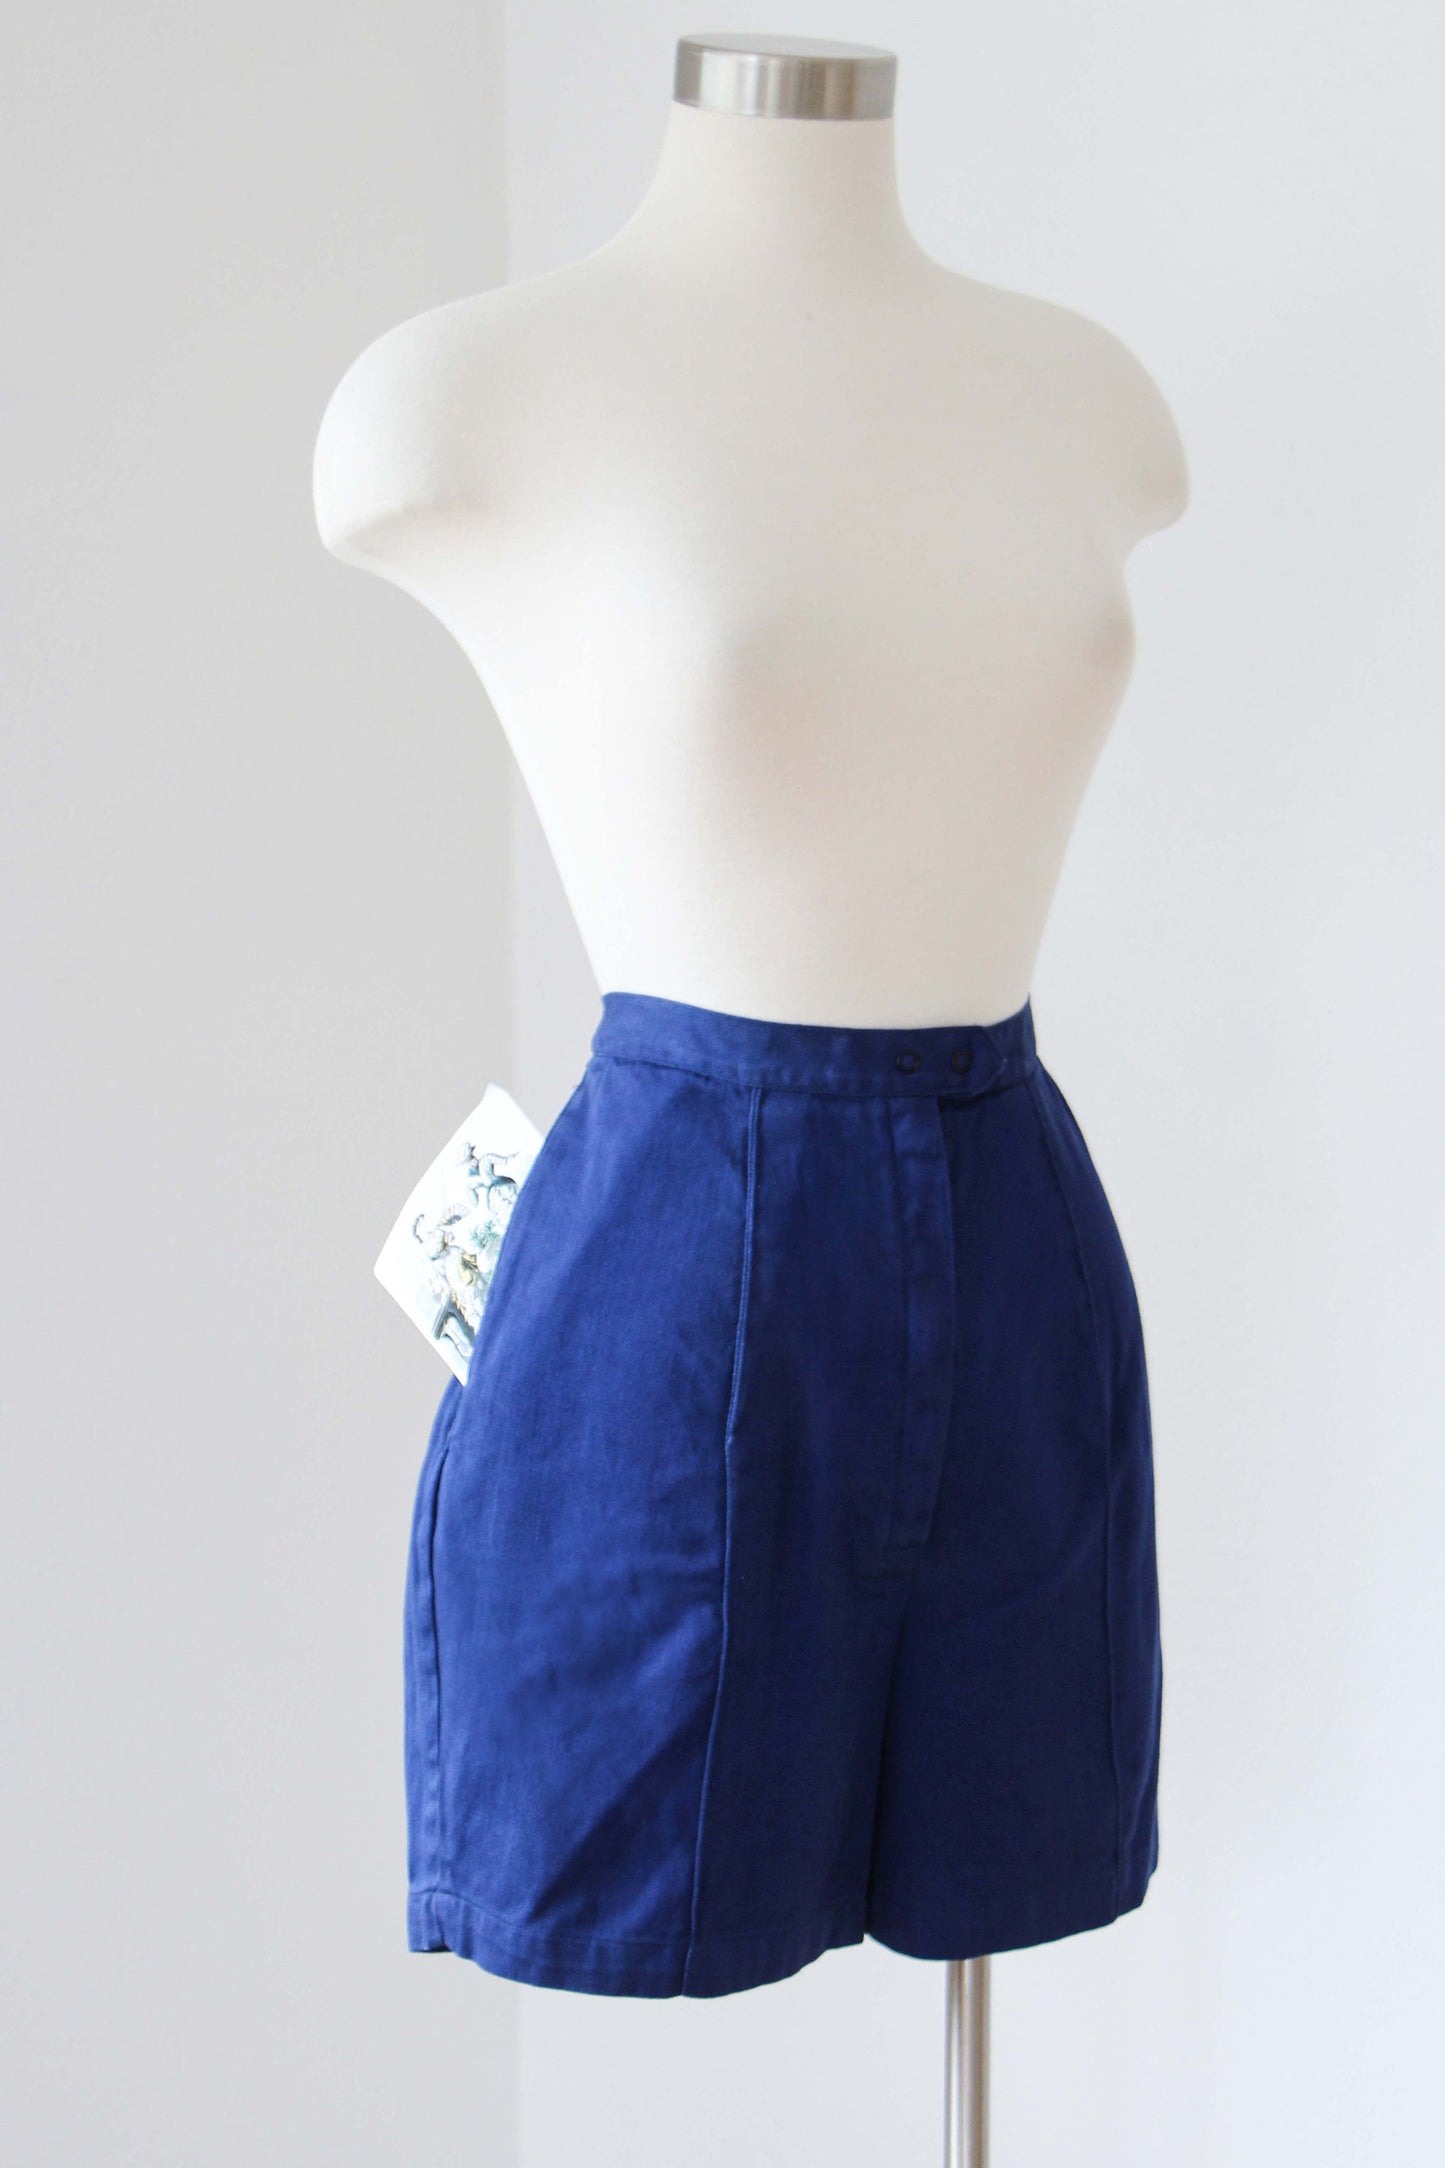 Vintage 1960s ROYAL BLUE Deadstock Cotton Sporty Athletic Gym Shorts w High Waist + Pockets! - Choose Your Size